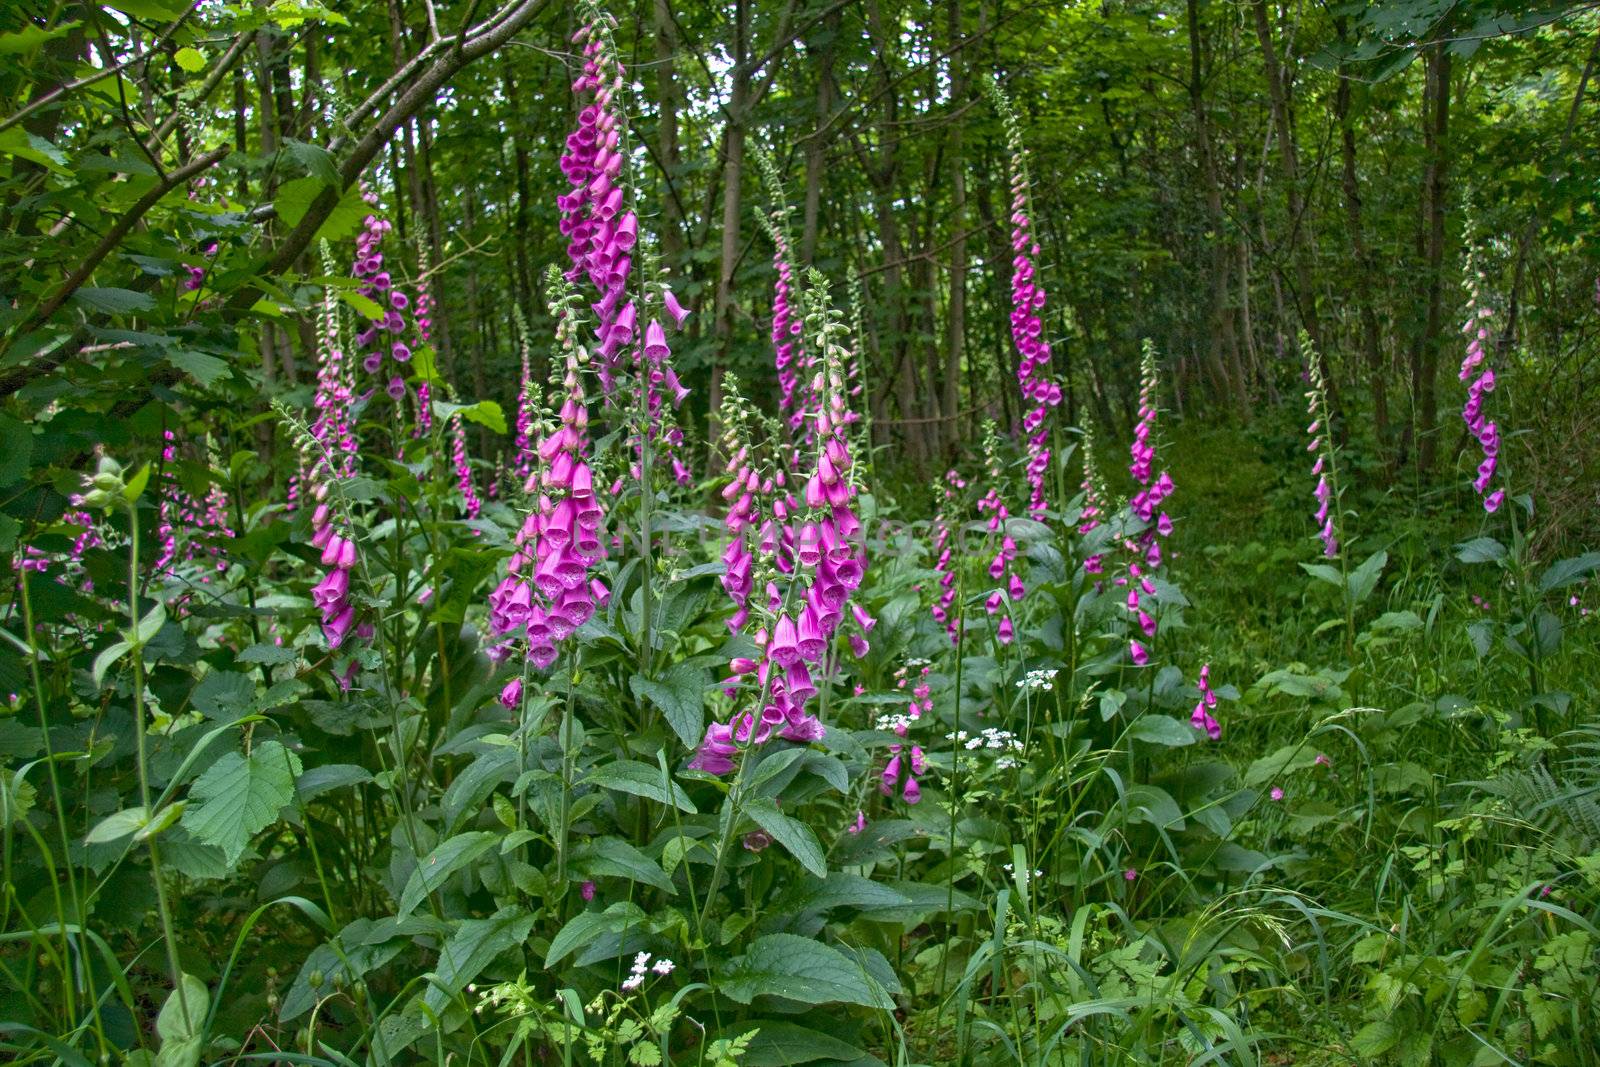 Wild foxgloves growing in a wood in Shropshire.